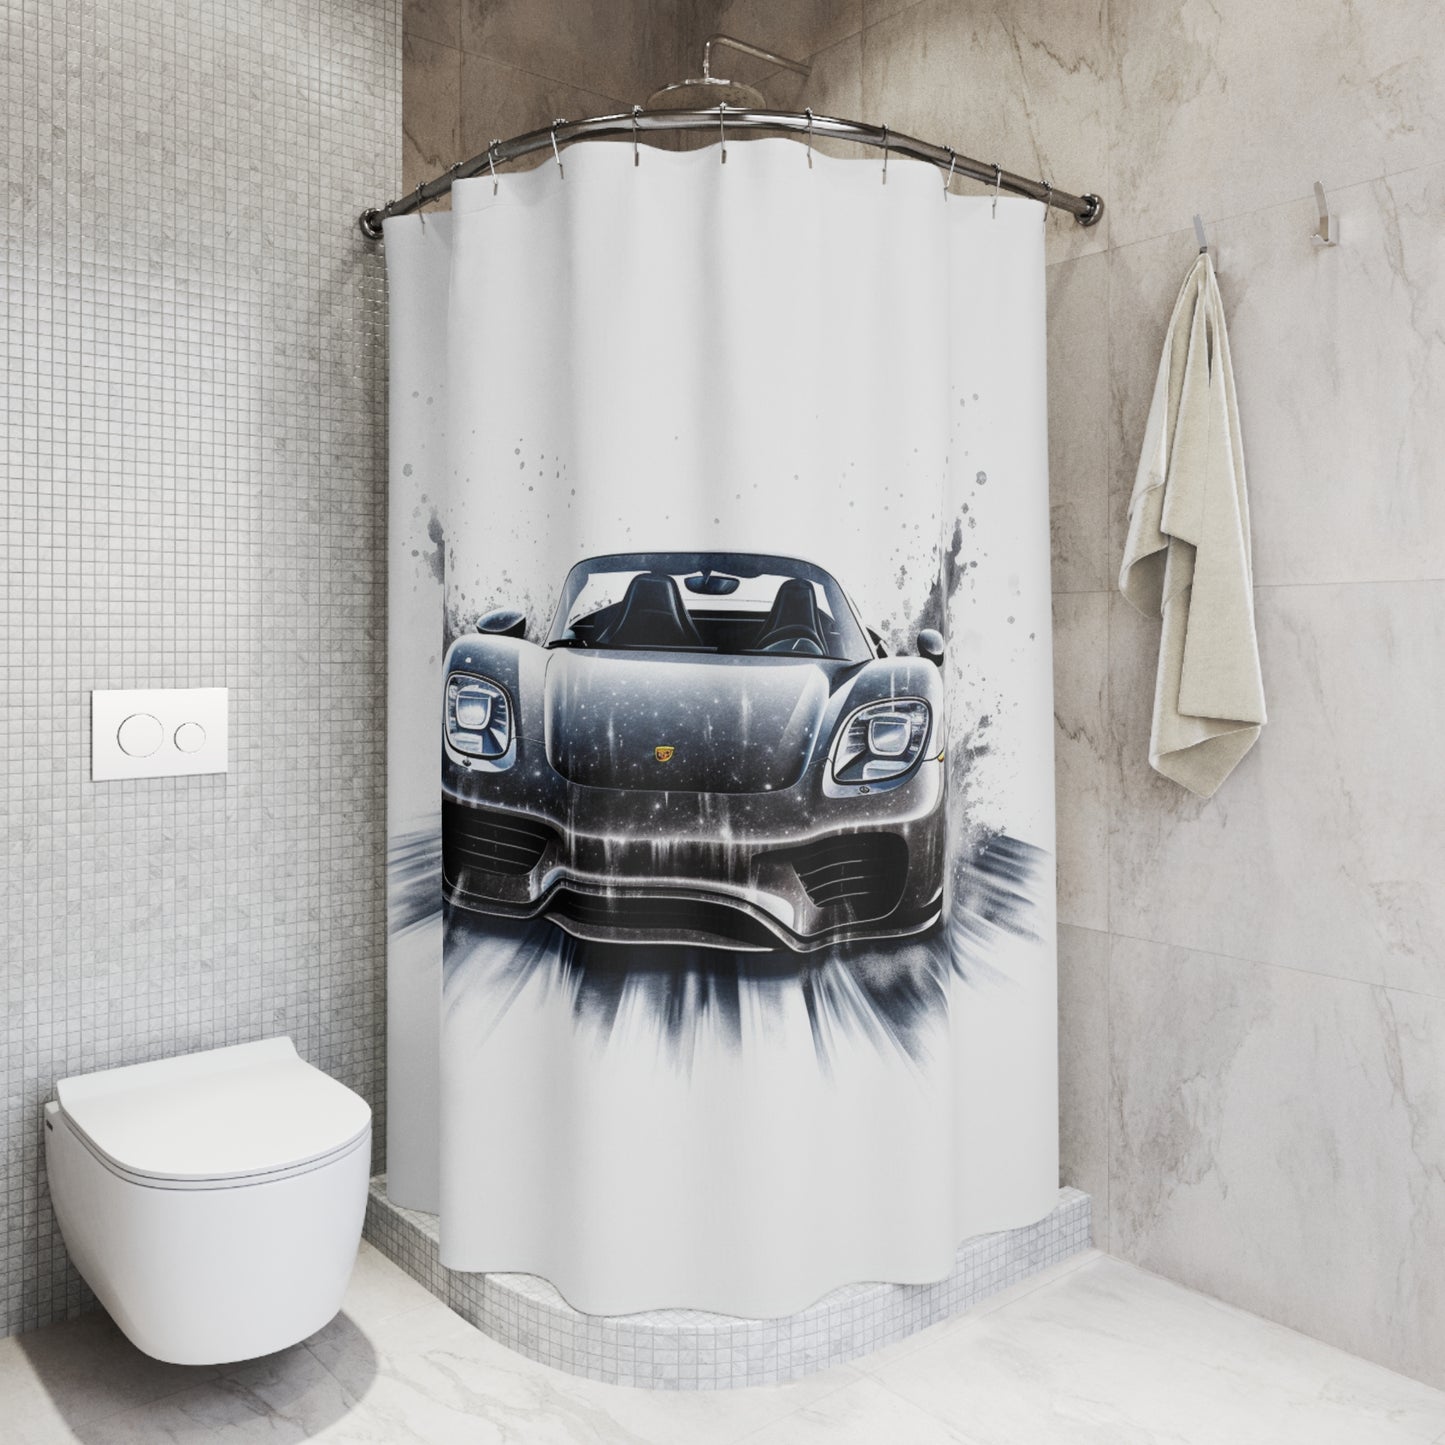 Polyester Shower Curtain 918 Spyder white background driving fast with water splashing 3